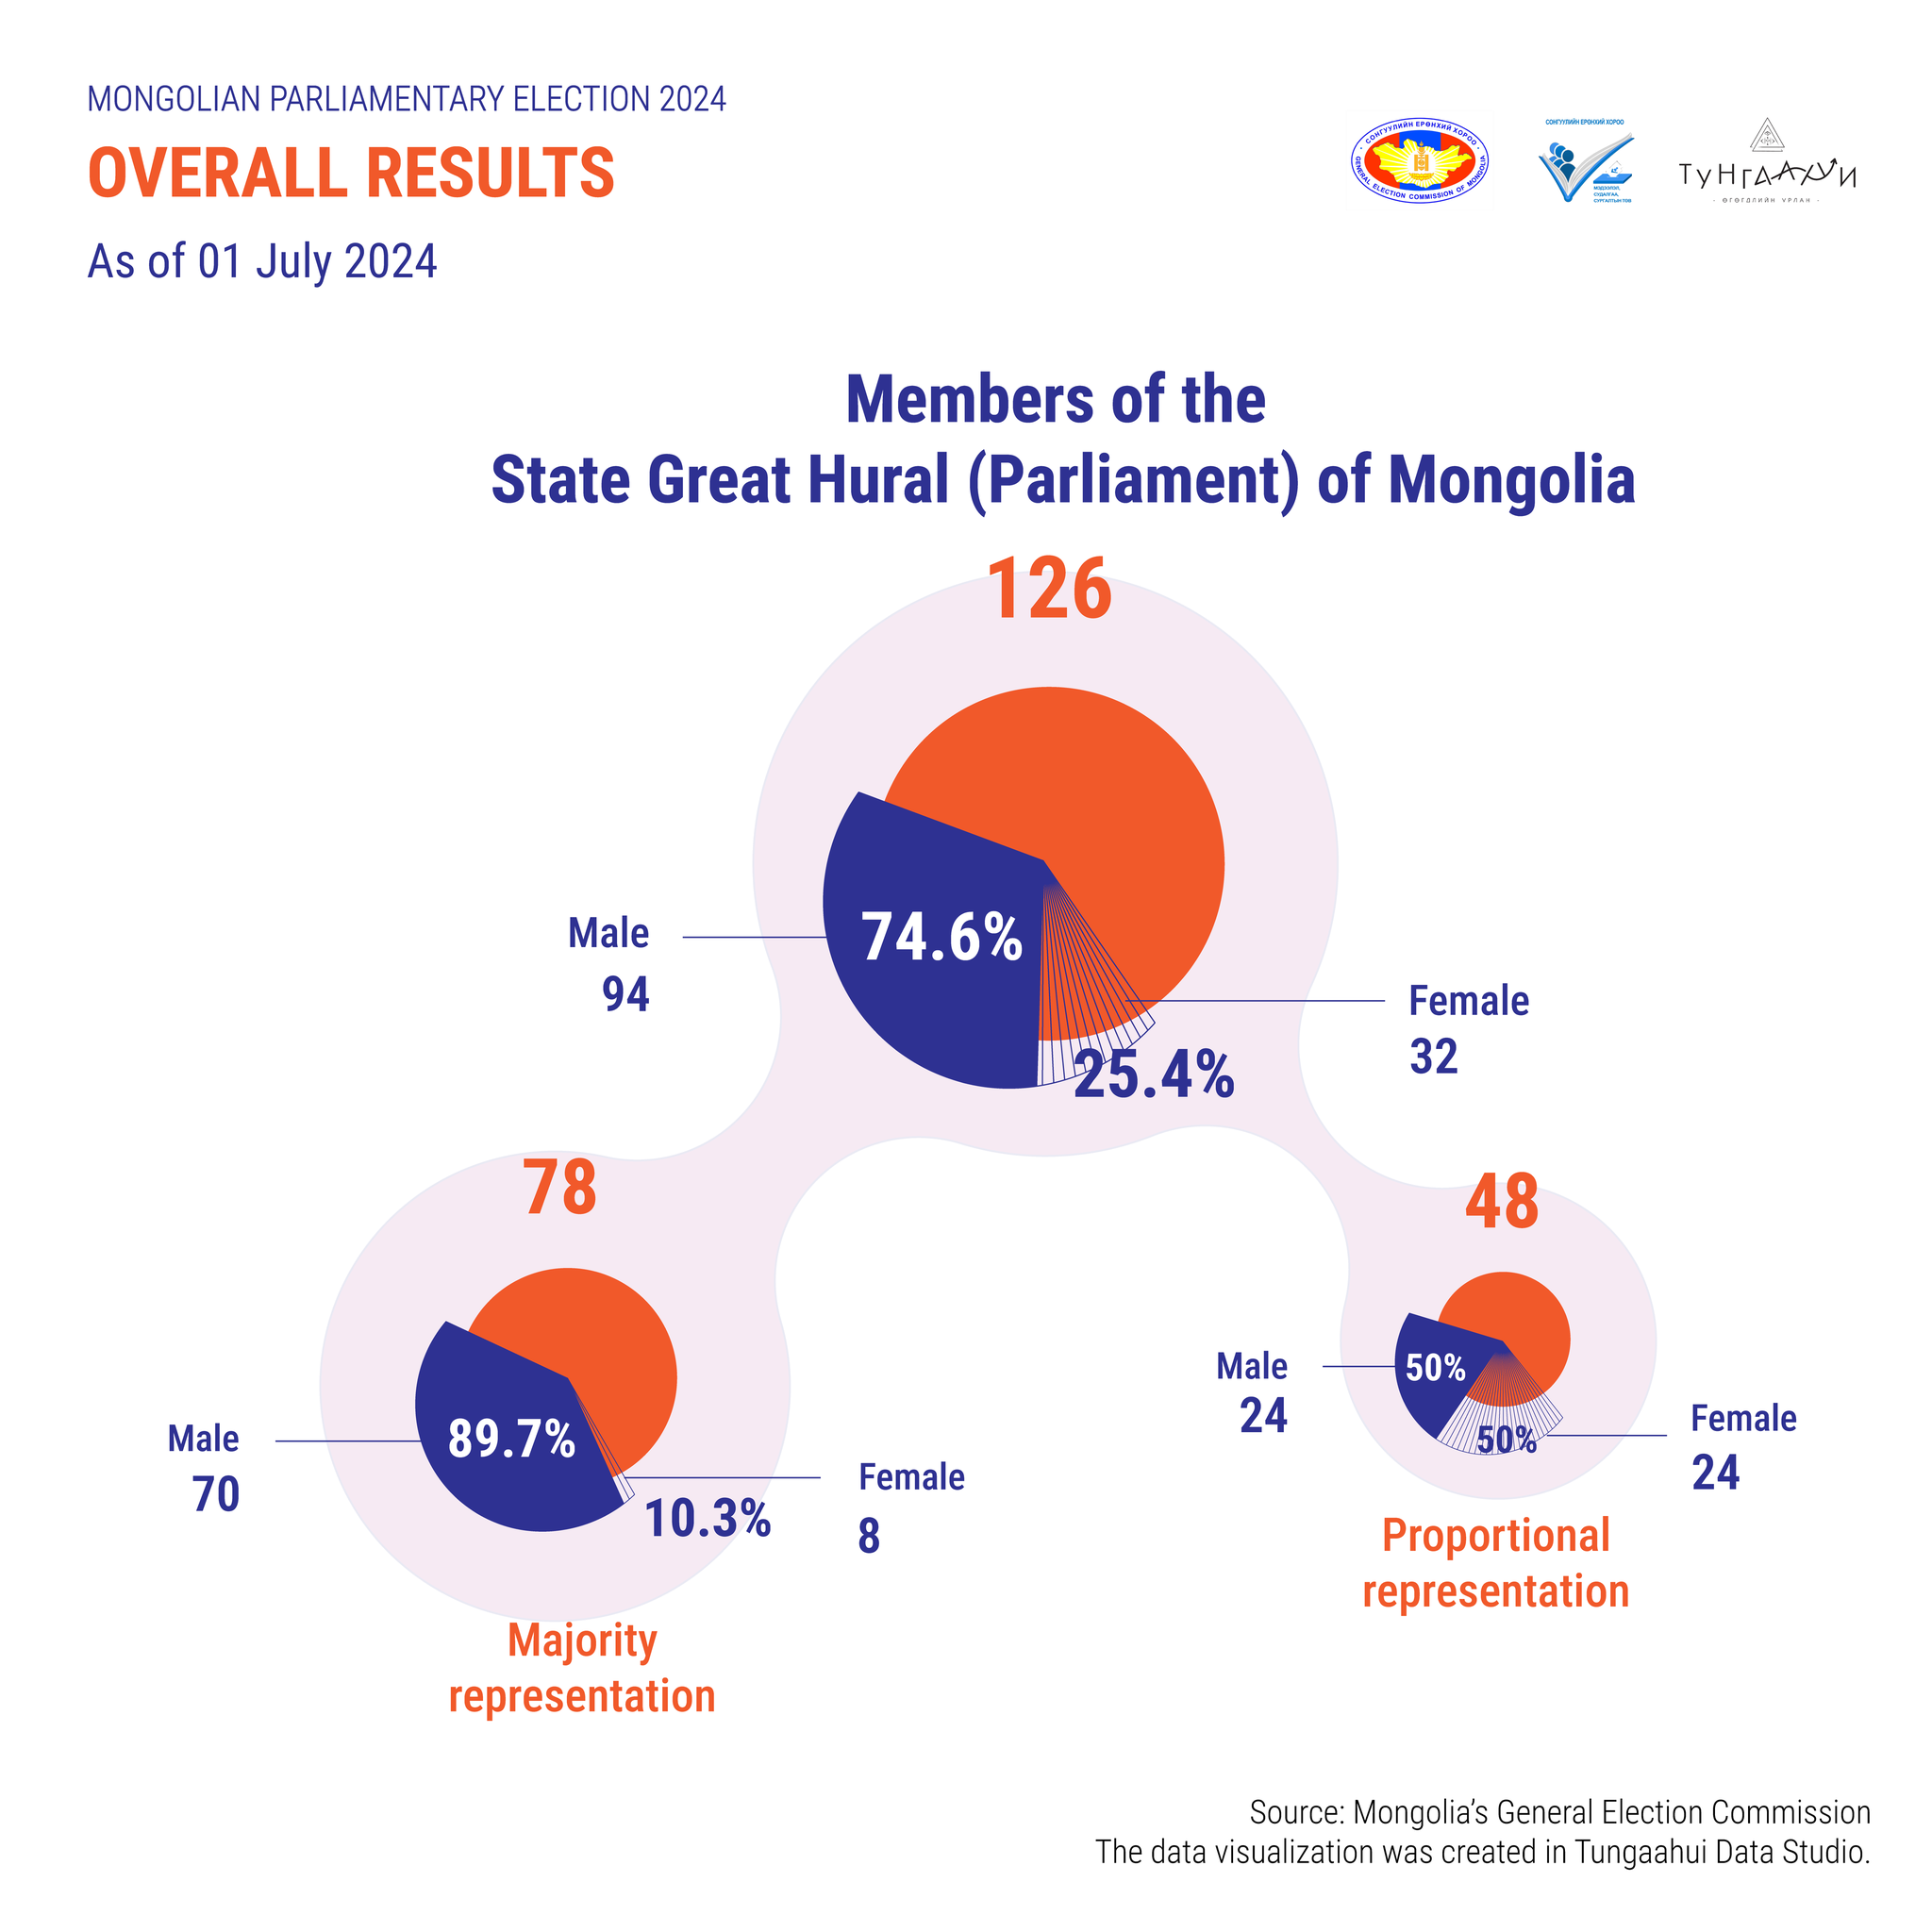 Seats by gender image, source: Election Commission of Mongolia